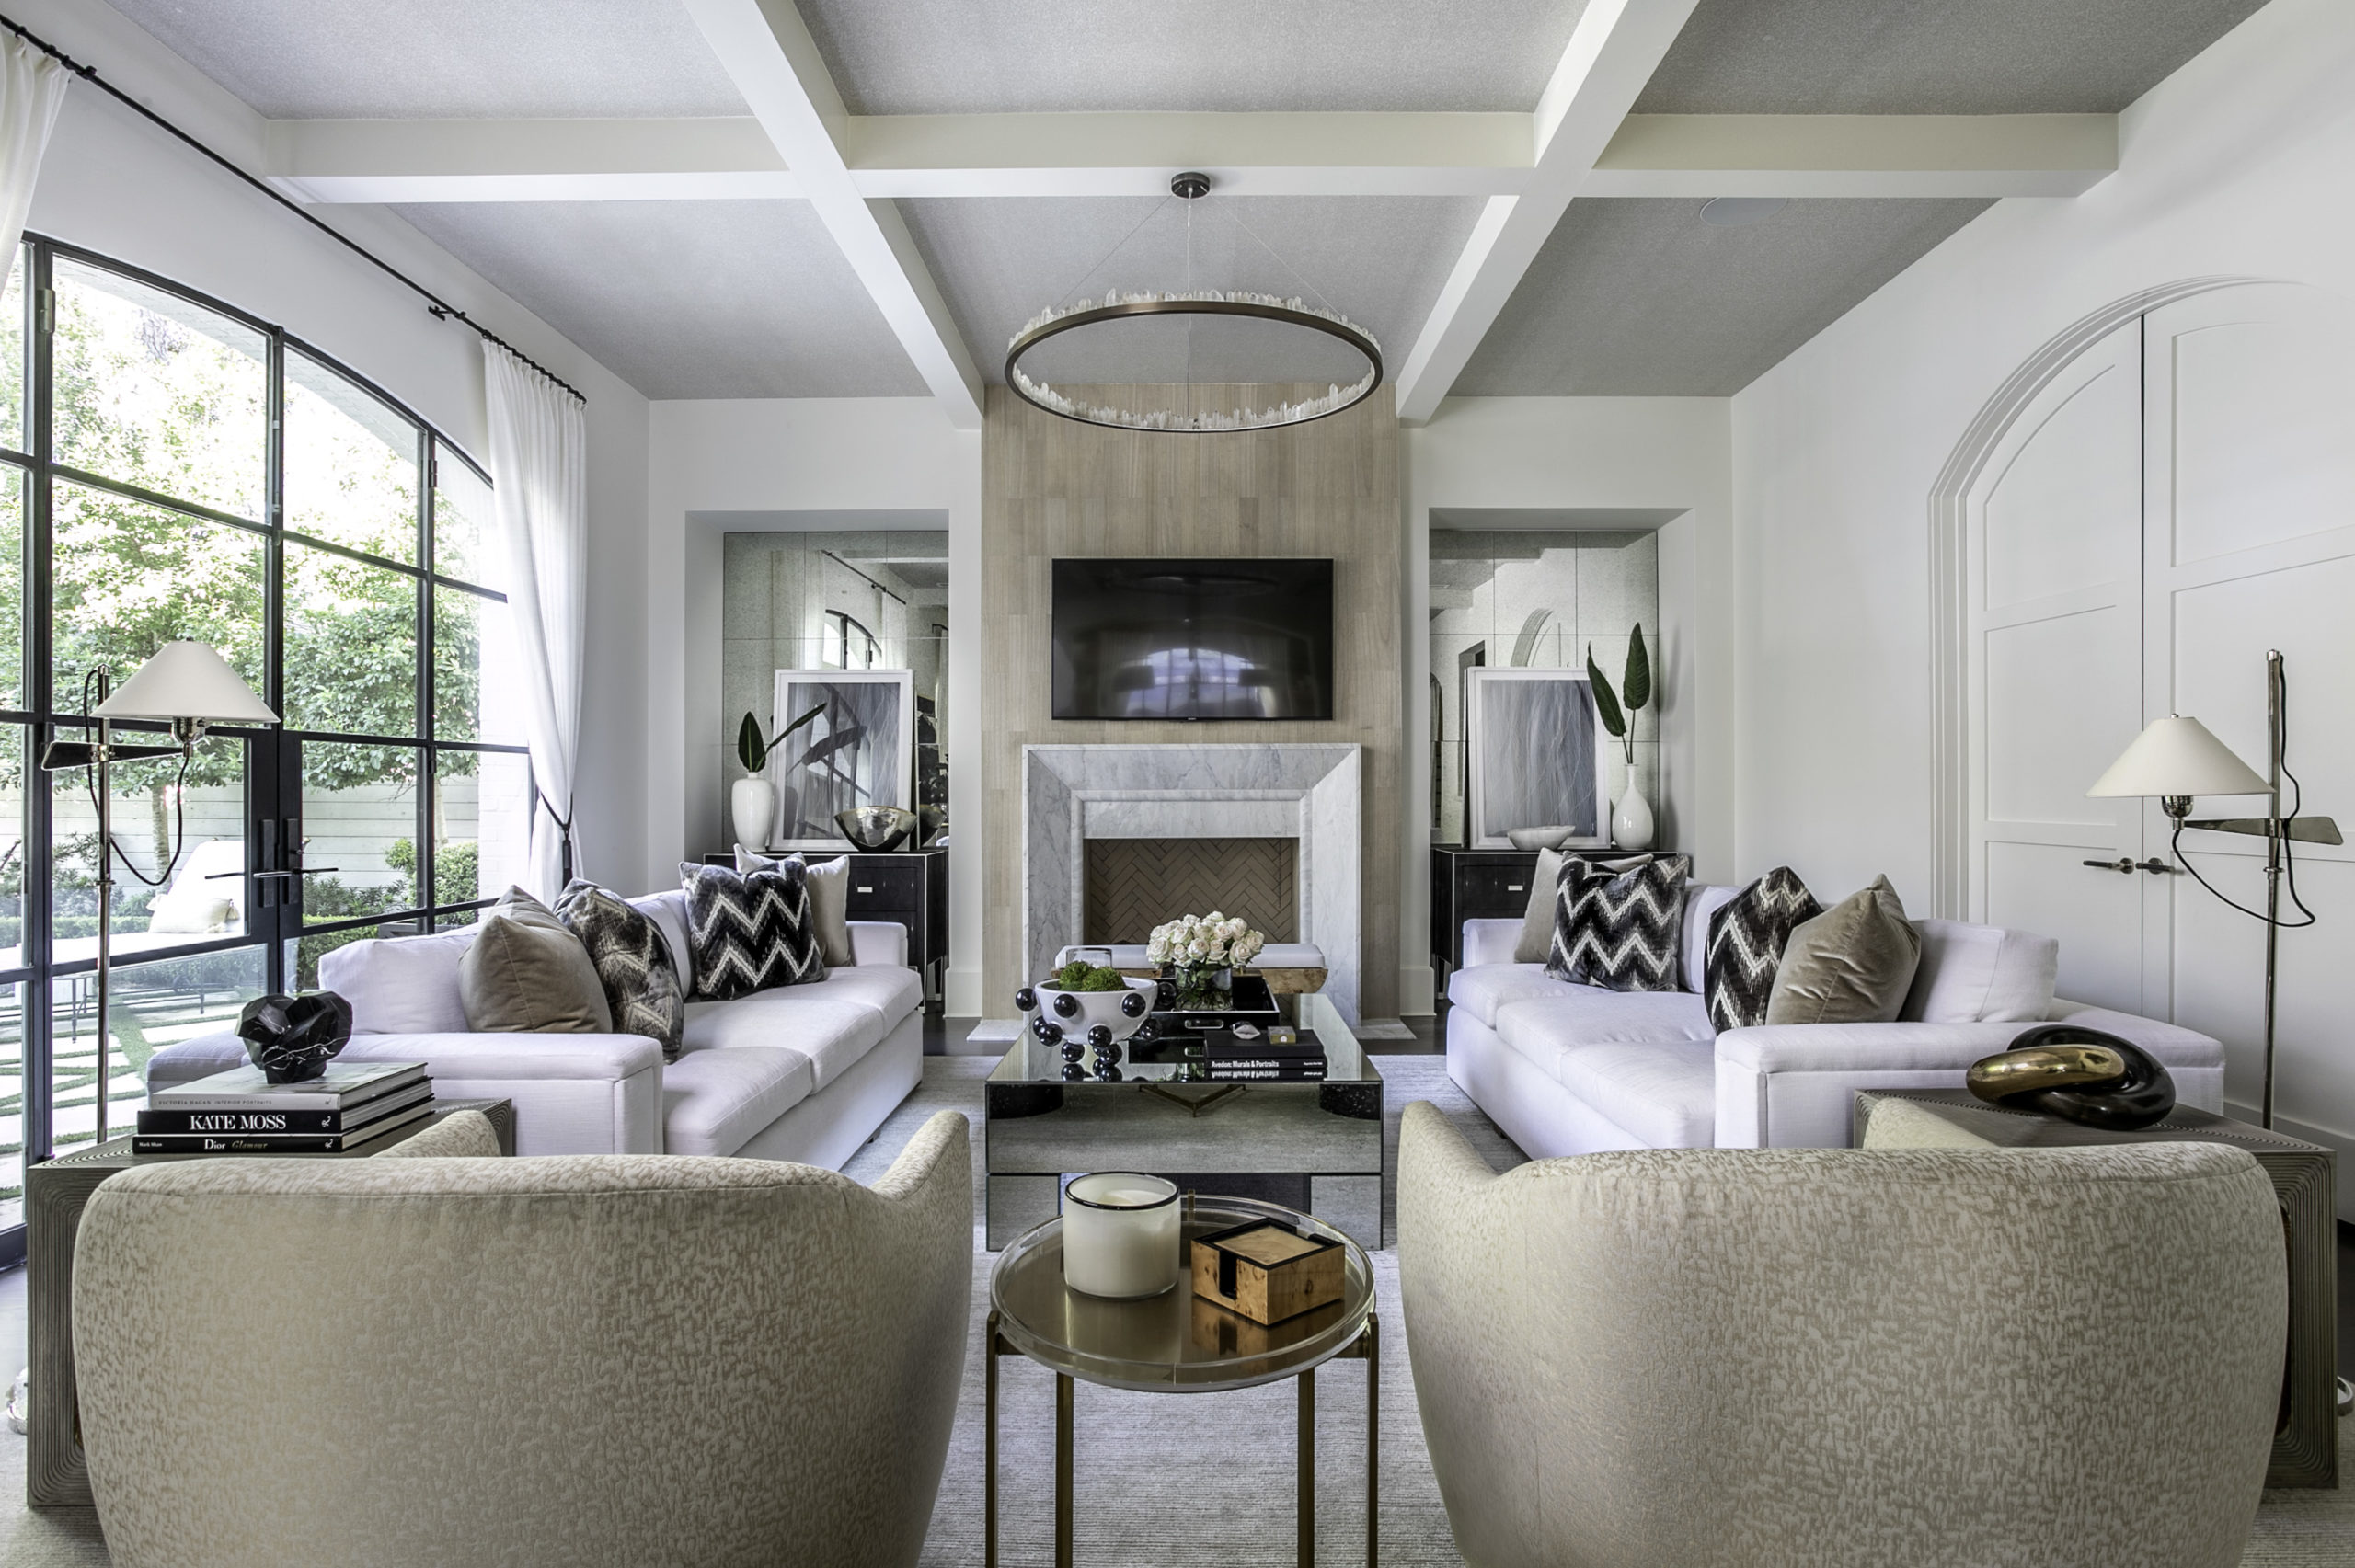 A coffered ceiling draws the eye upward in this symmetrical living room designed by Laura U